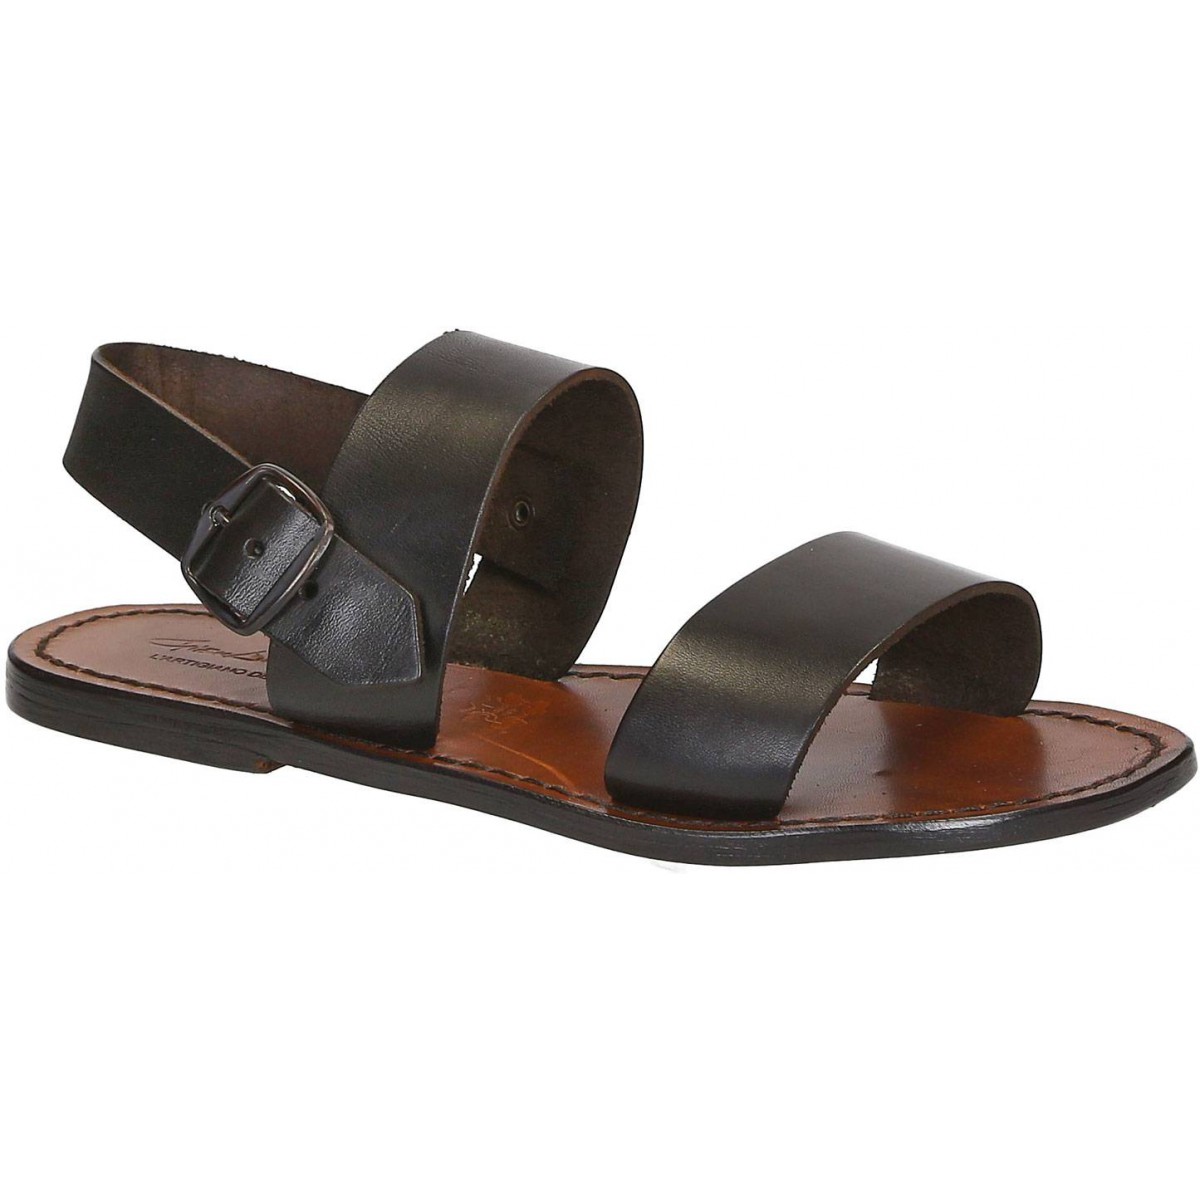 handmade women's sandals real leather made in italy leather leather sandals leather sandals